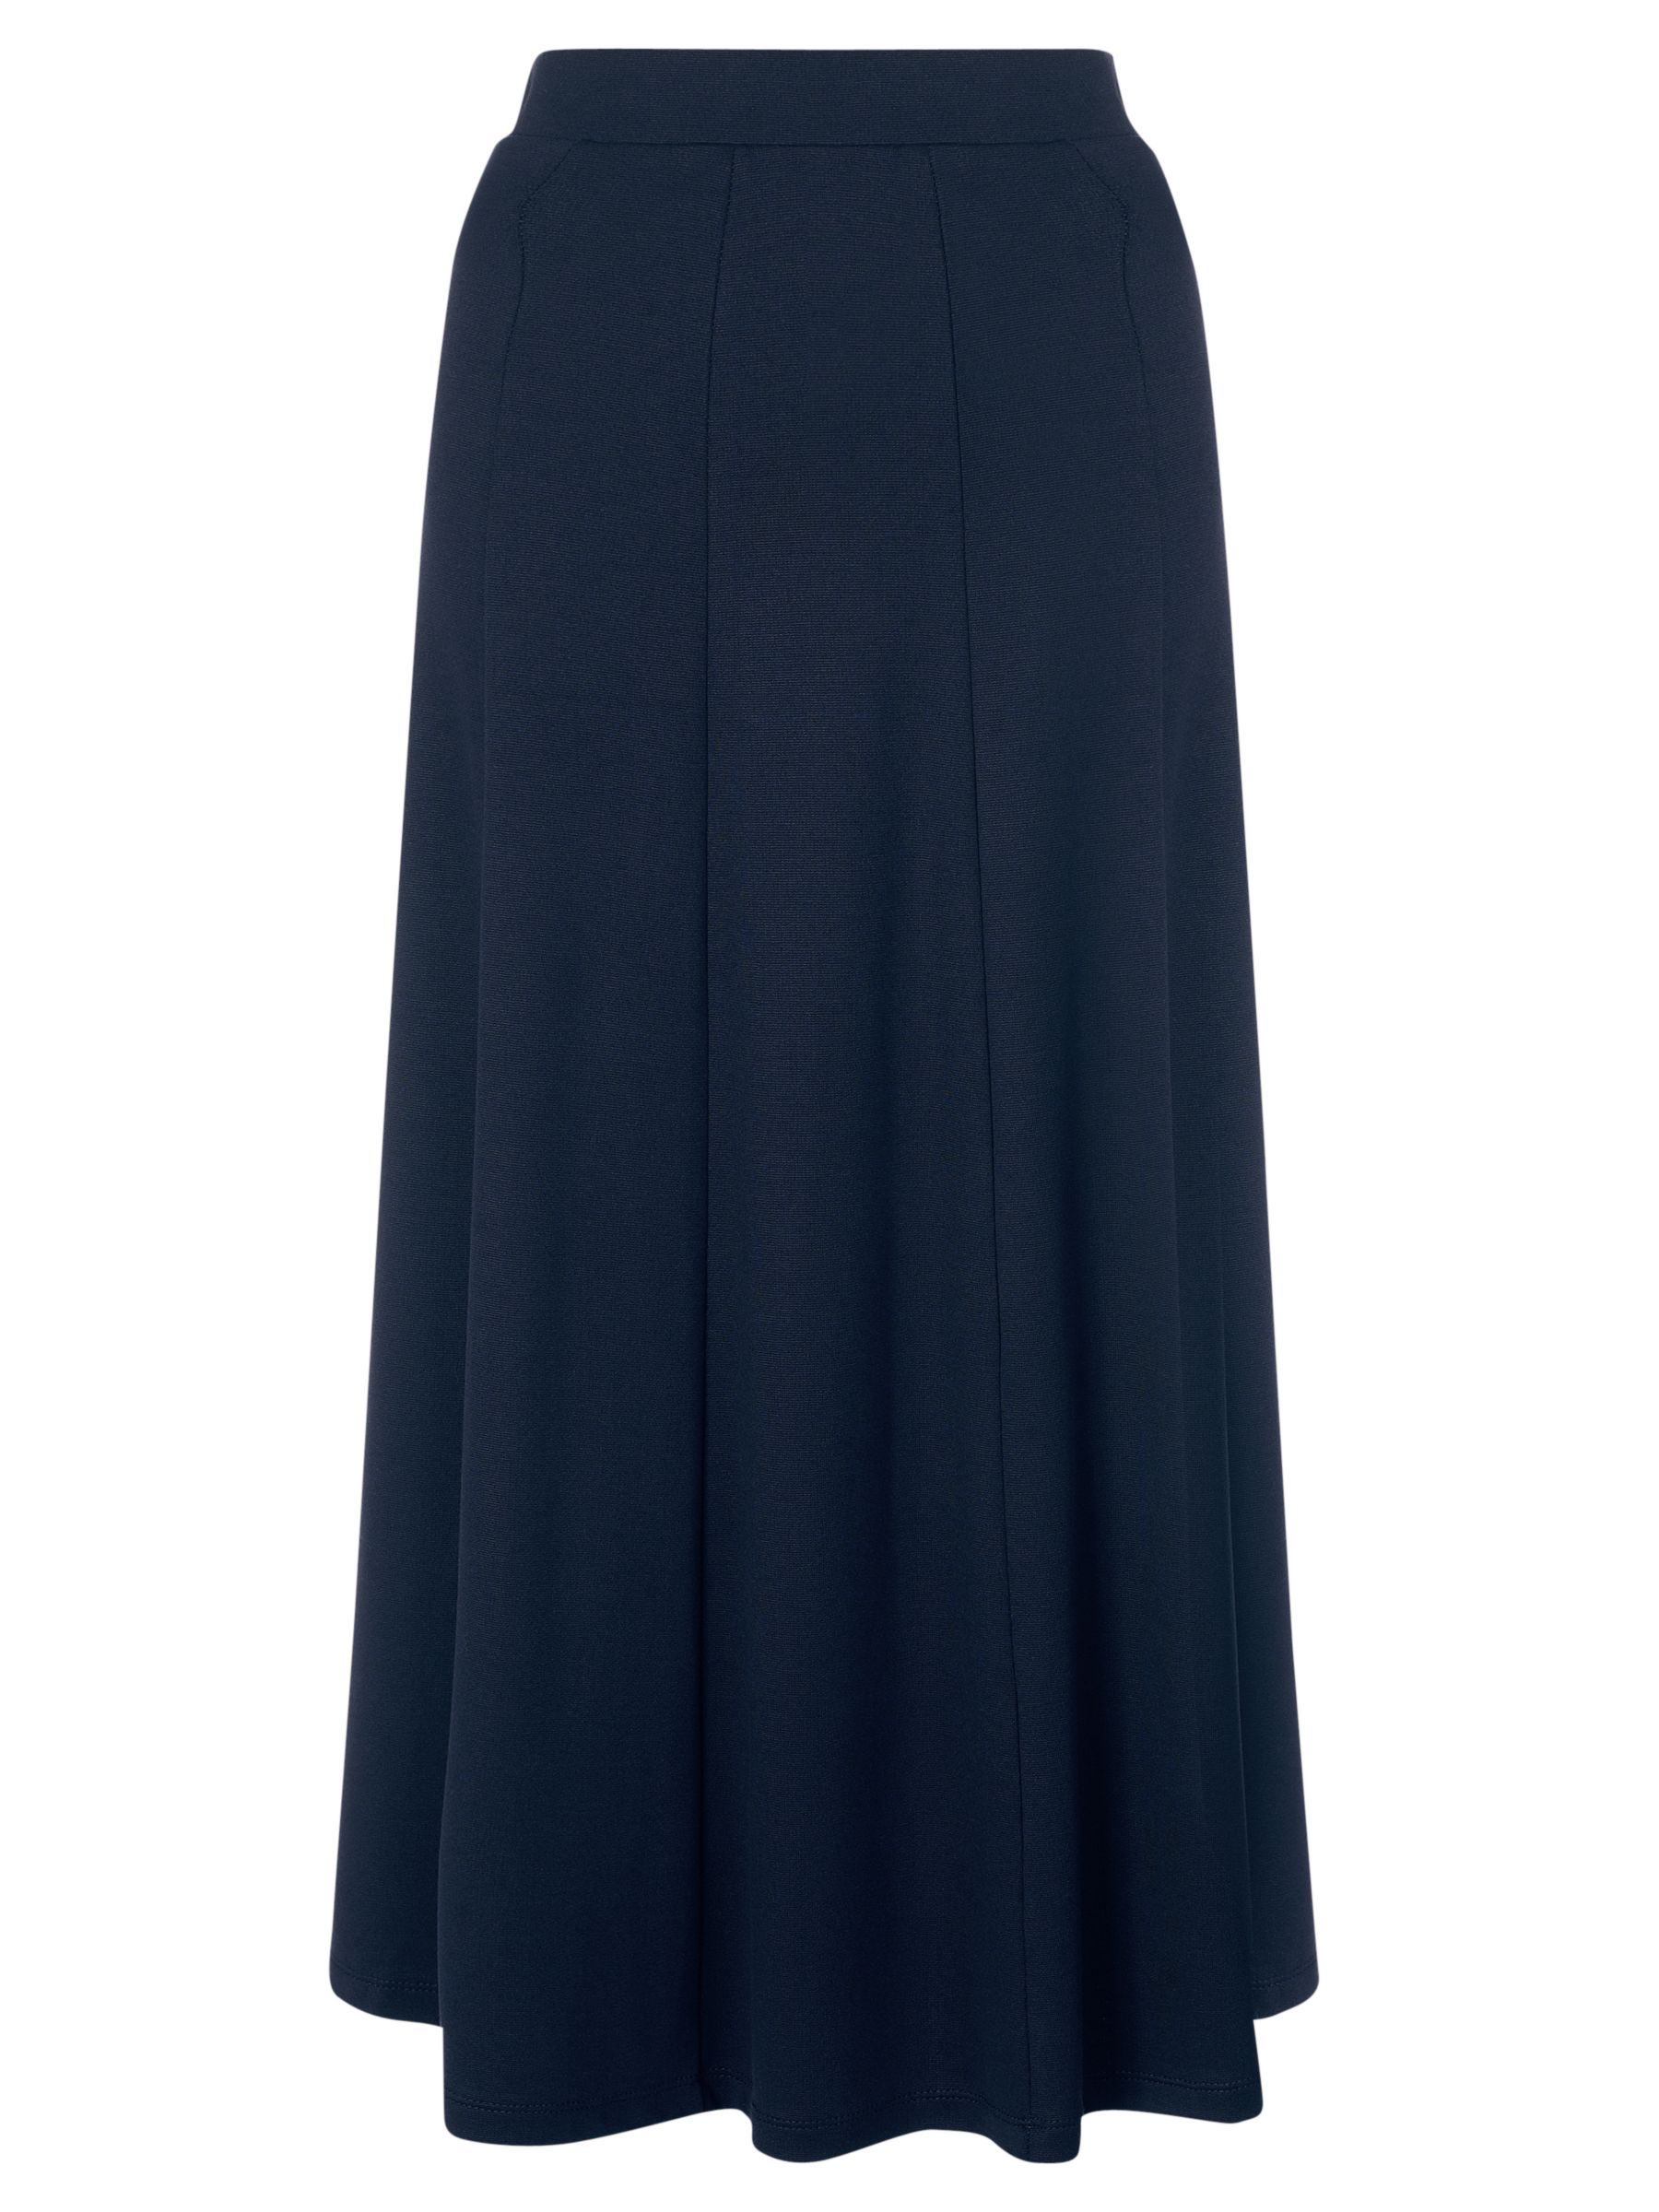 John Lewis Capsule Collection Panelled Jersey Maxi Skirt